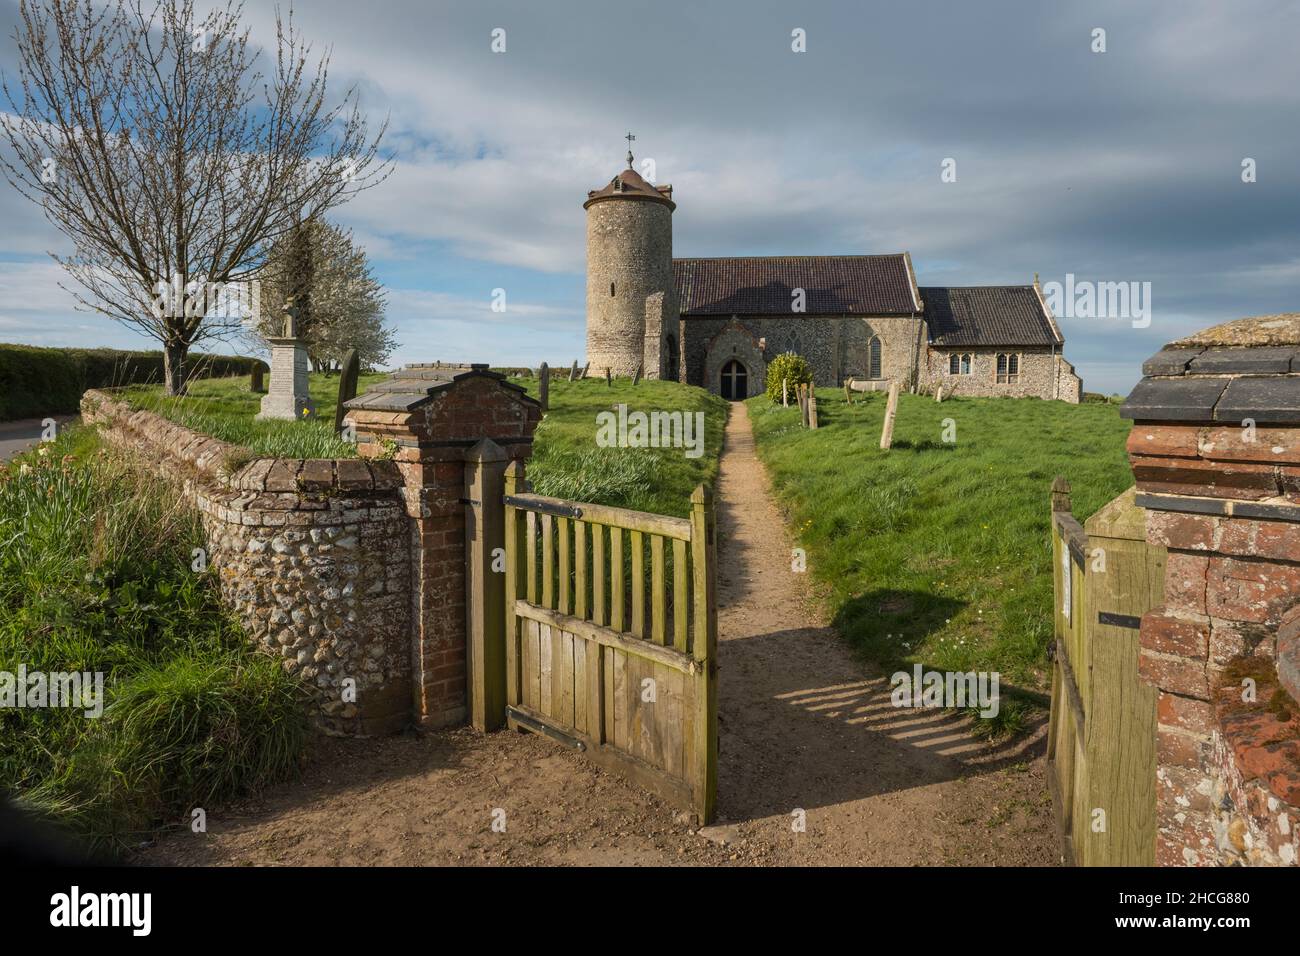 The Church of St Andrew, Little Snoring, Norfolk, England. Stock Photo